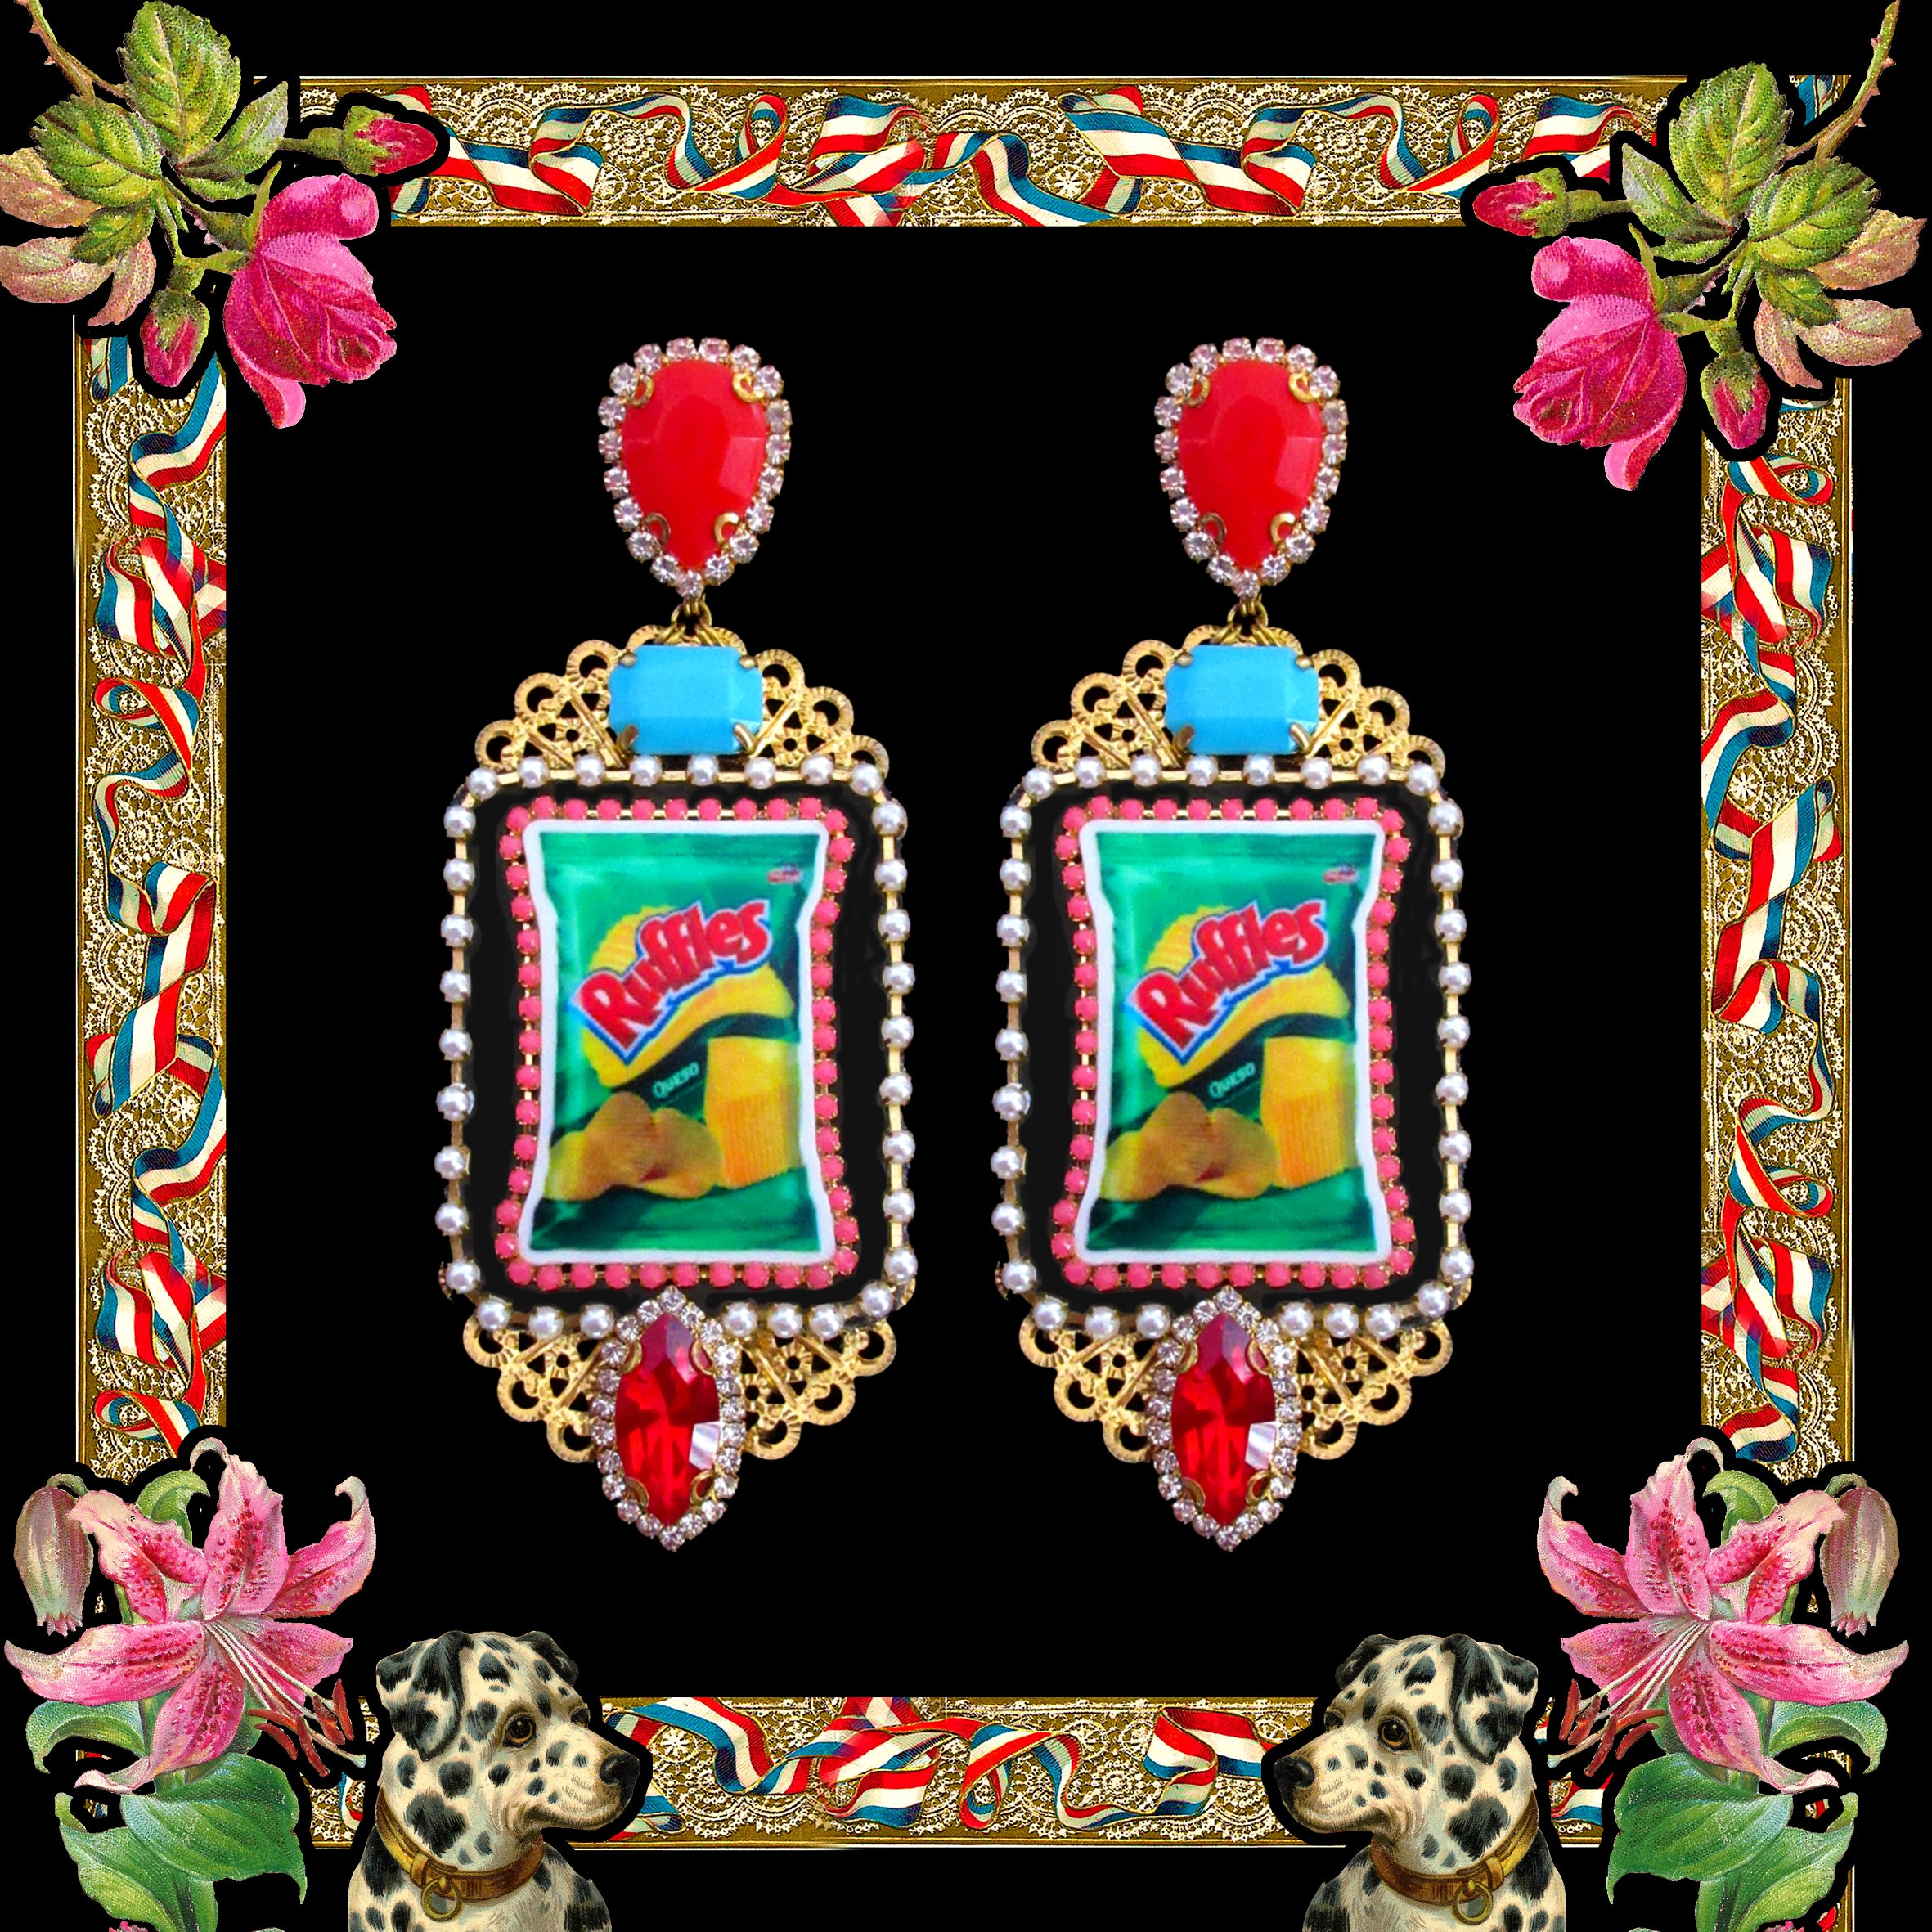 mouchkine jewelry made in france pop culture fashion earrings